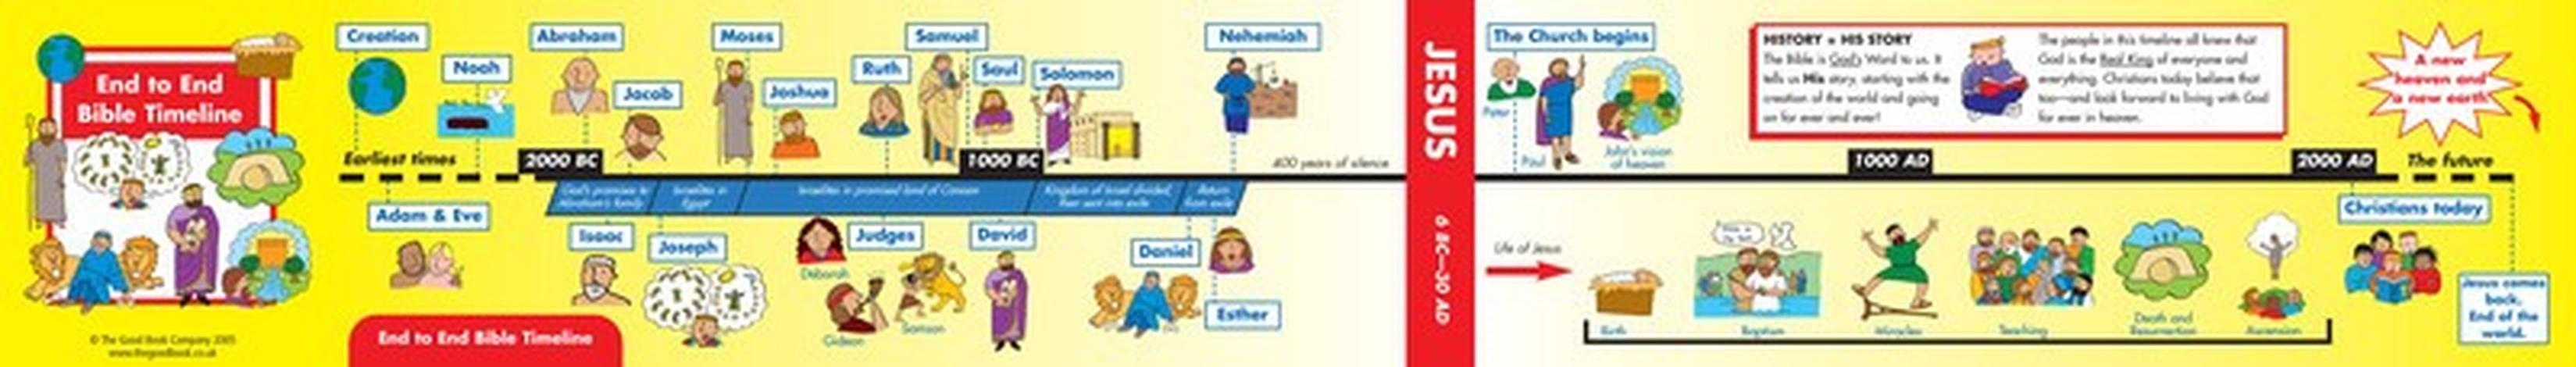 XTB Bible Timeline by Alison Mitchell